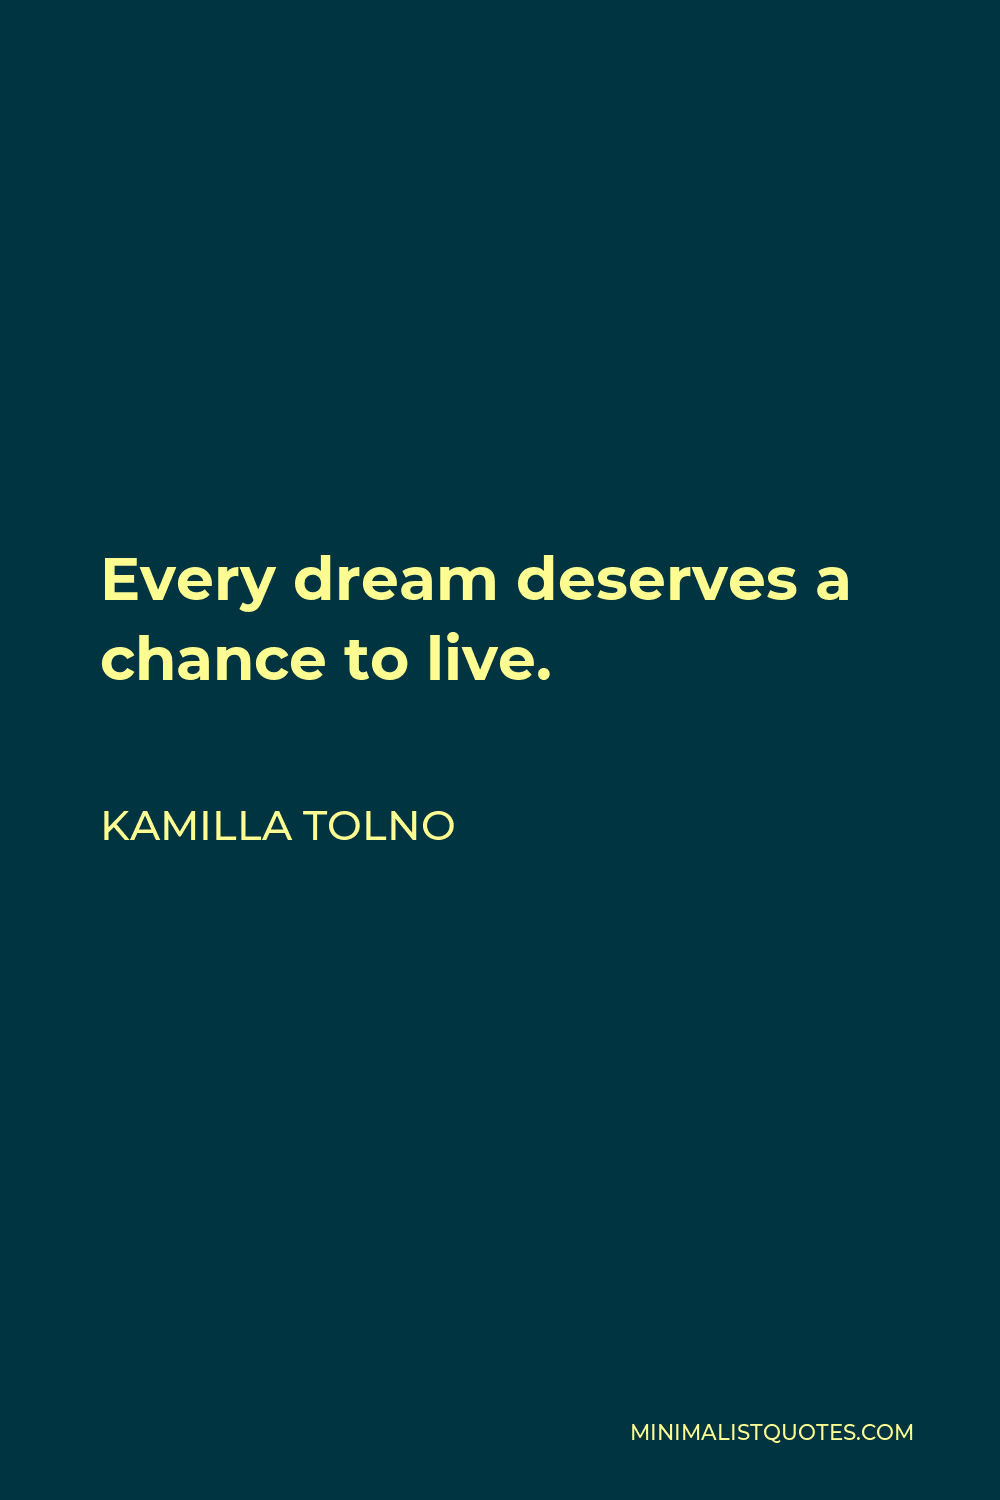 Kamilla Tolno Quote - Every dream deserves a chance to live.